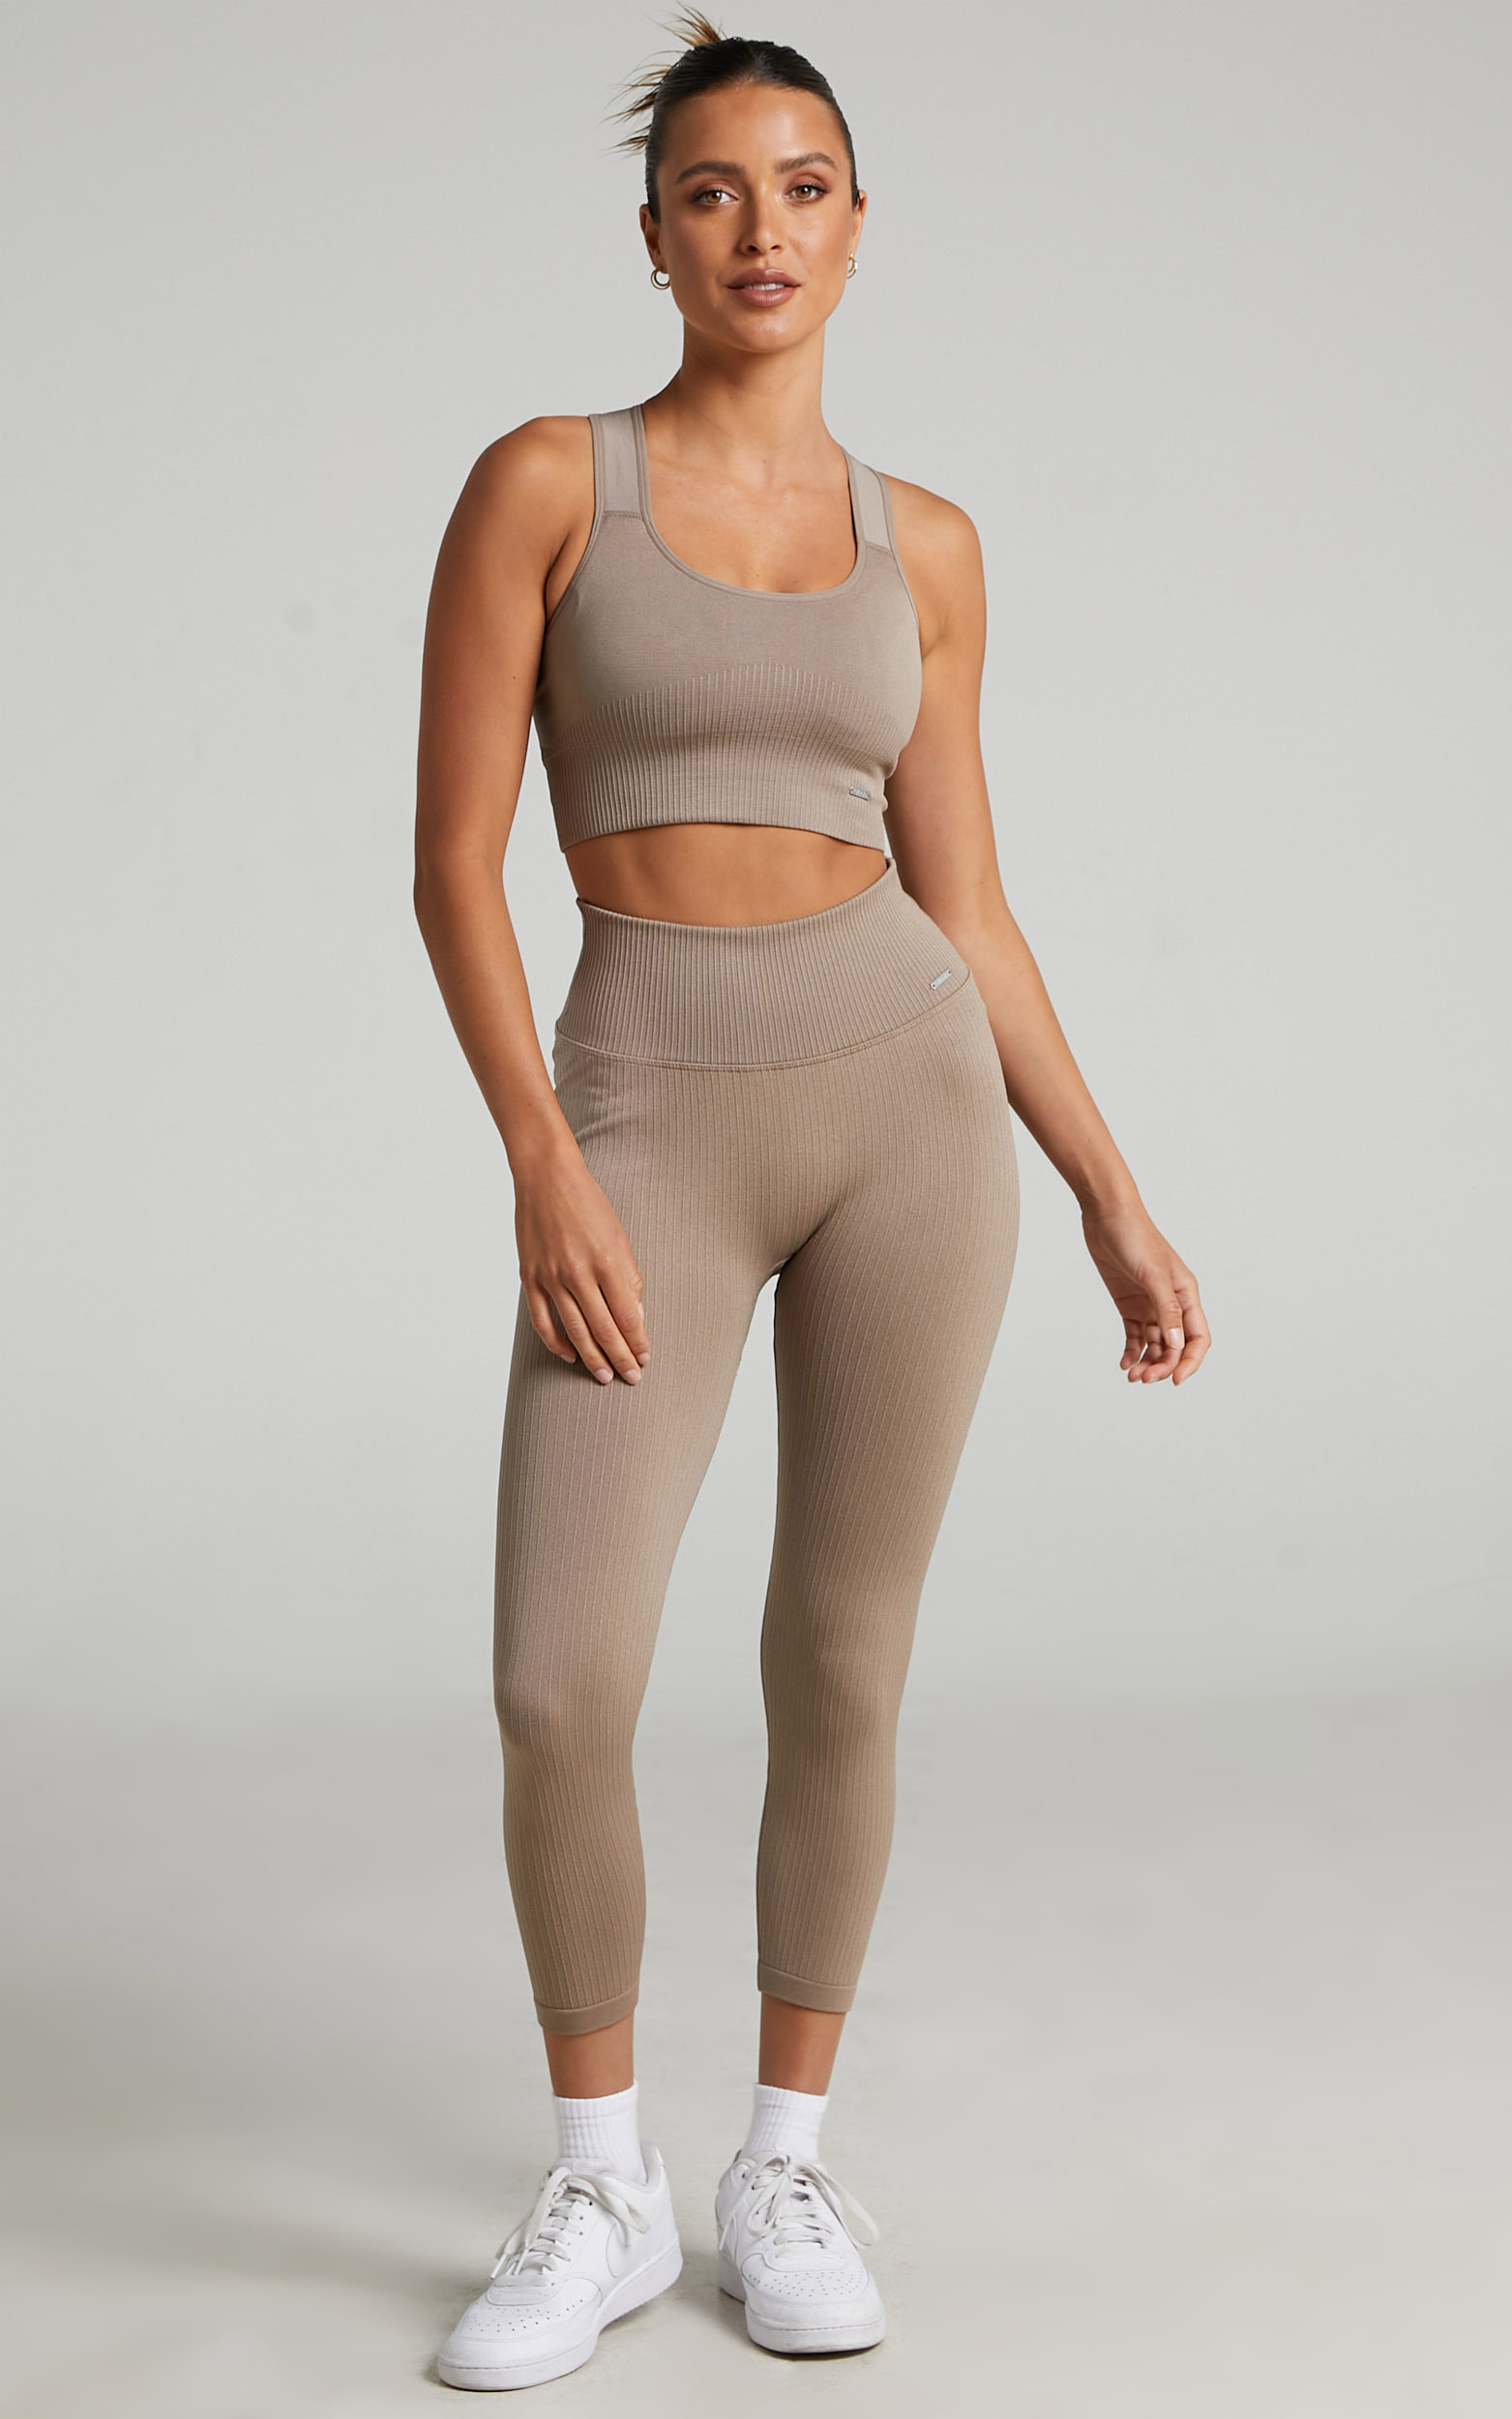 Aim'n - RIBBED SEAMLESS TIGHTS 7/8 in Espresso